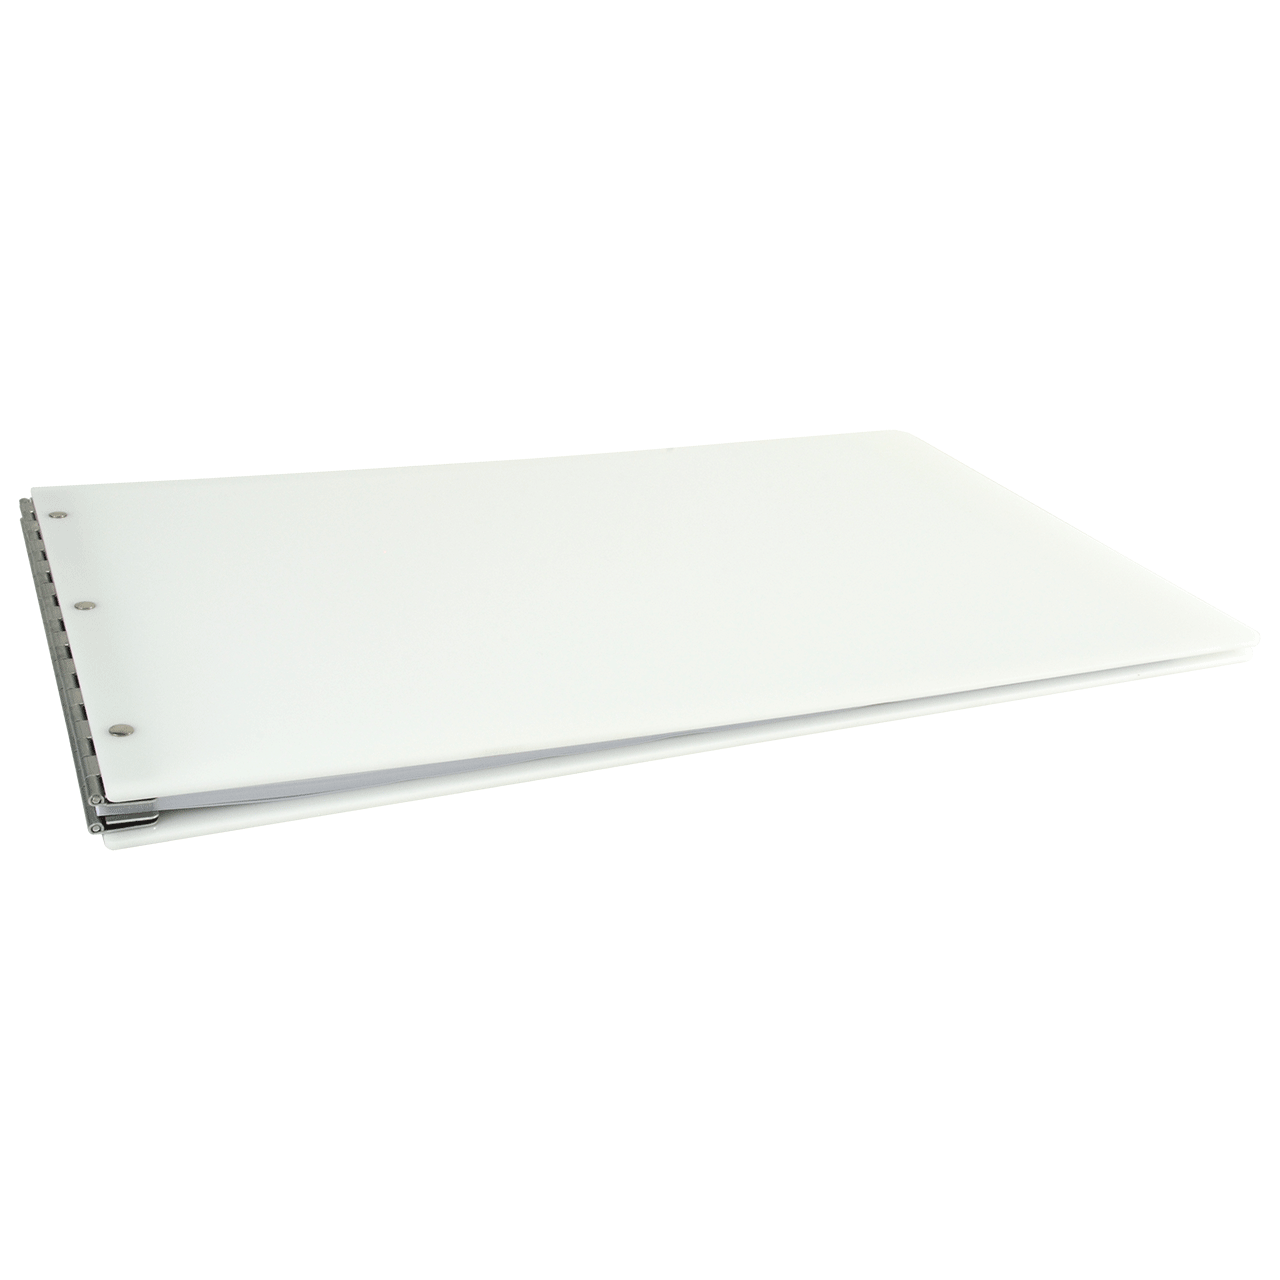 11x17 Screw Post Binder Acrylic Panel with fixed posts White